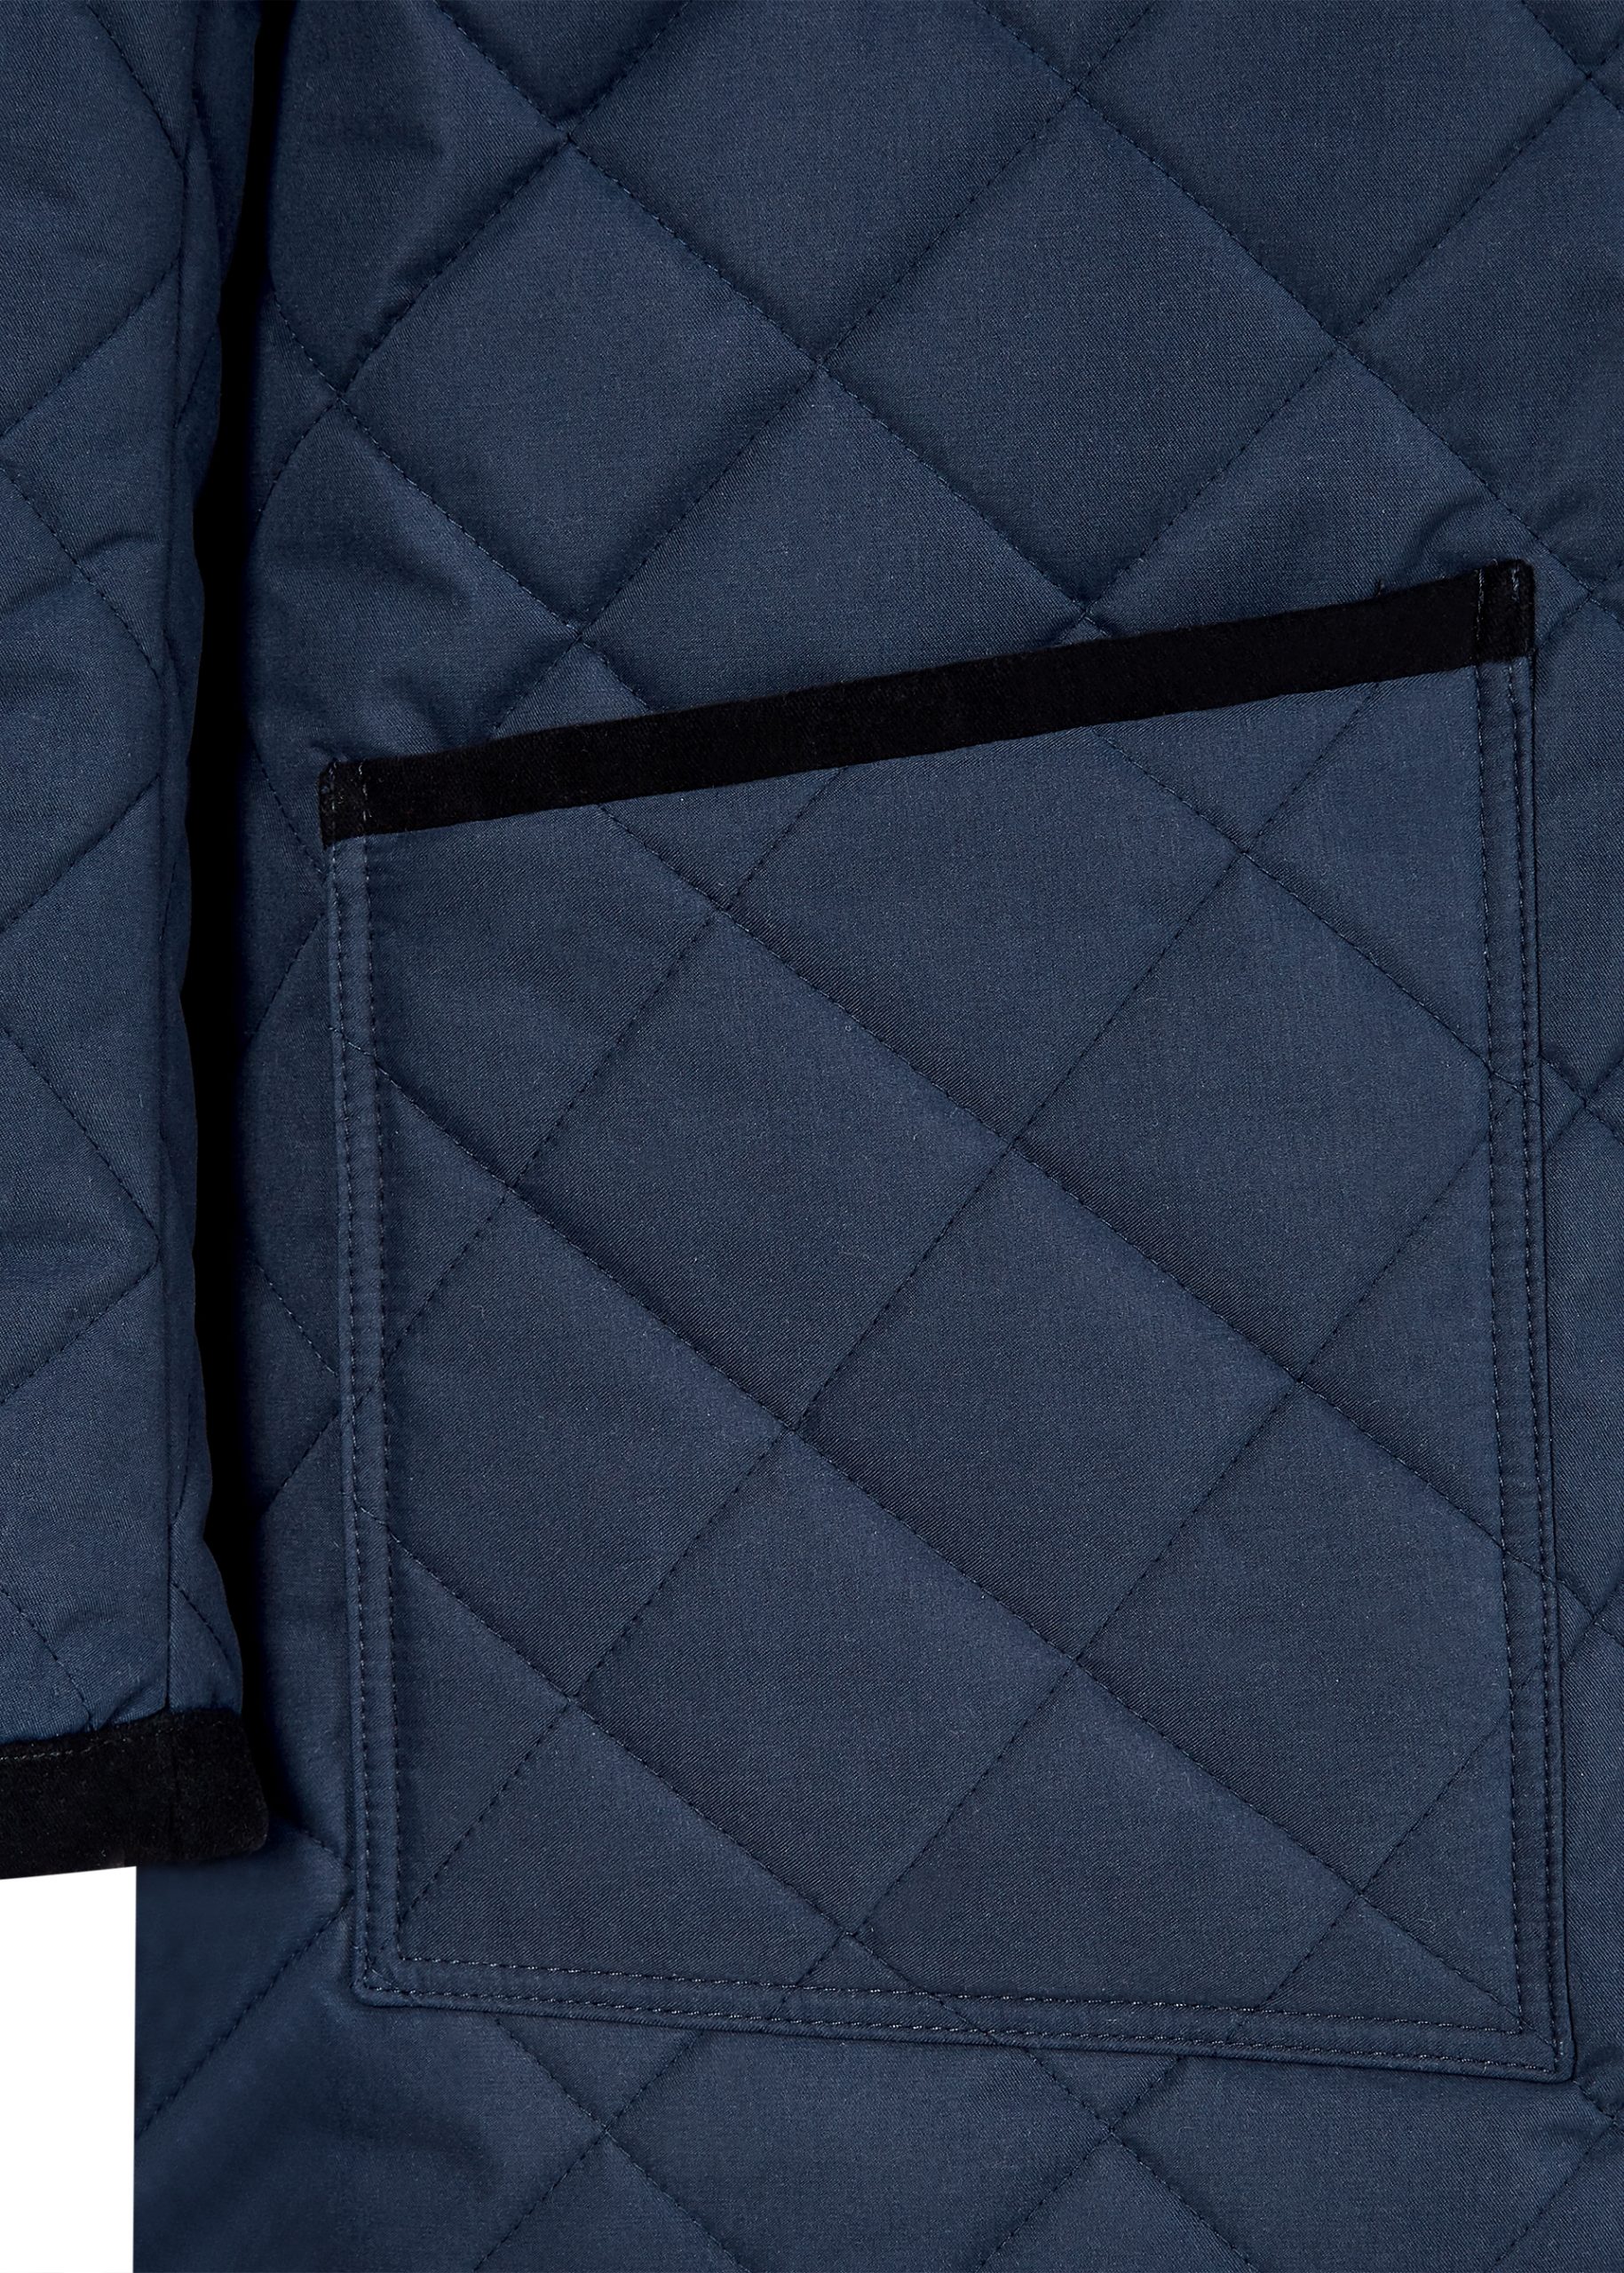 Six buttoned front quilted navy jacket